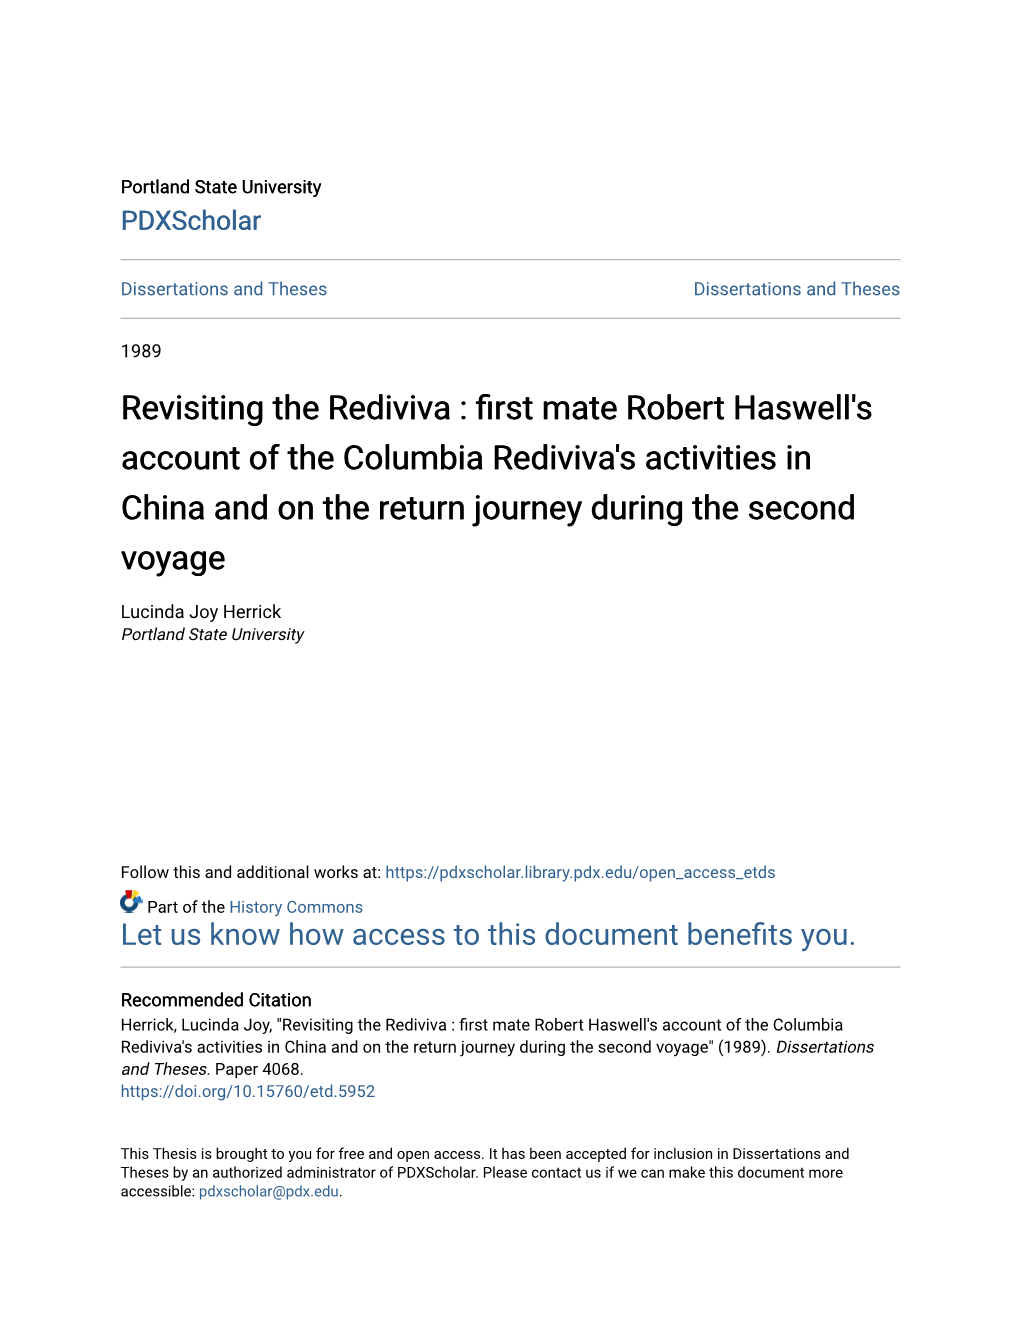 First Mate Robert Haswell's Account of the Columbia Rediviva's Activities in China and on the Return Journey During the Second Voyage